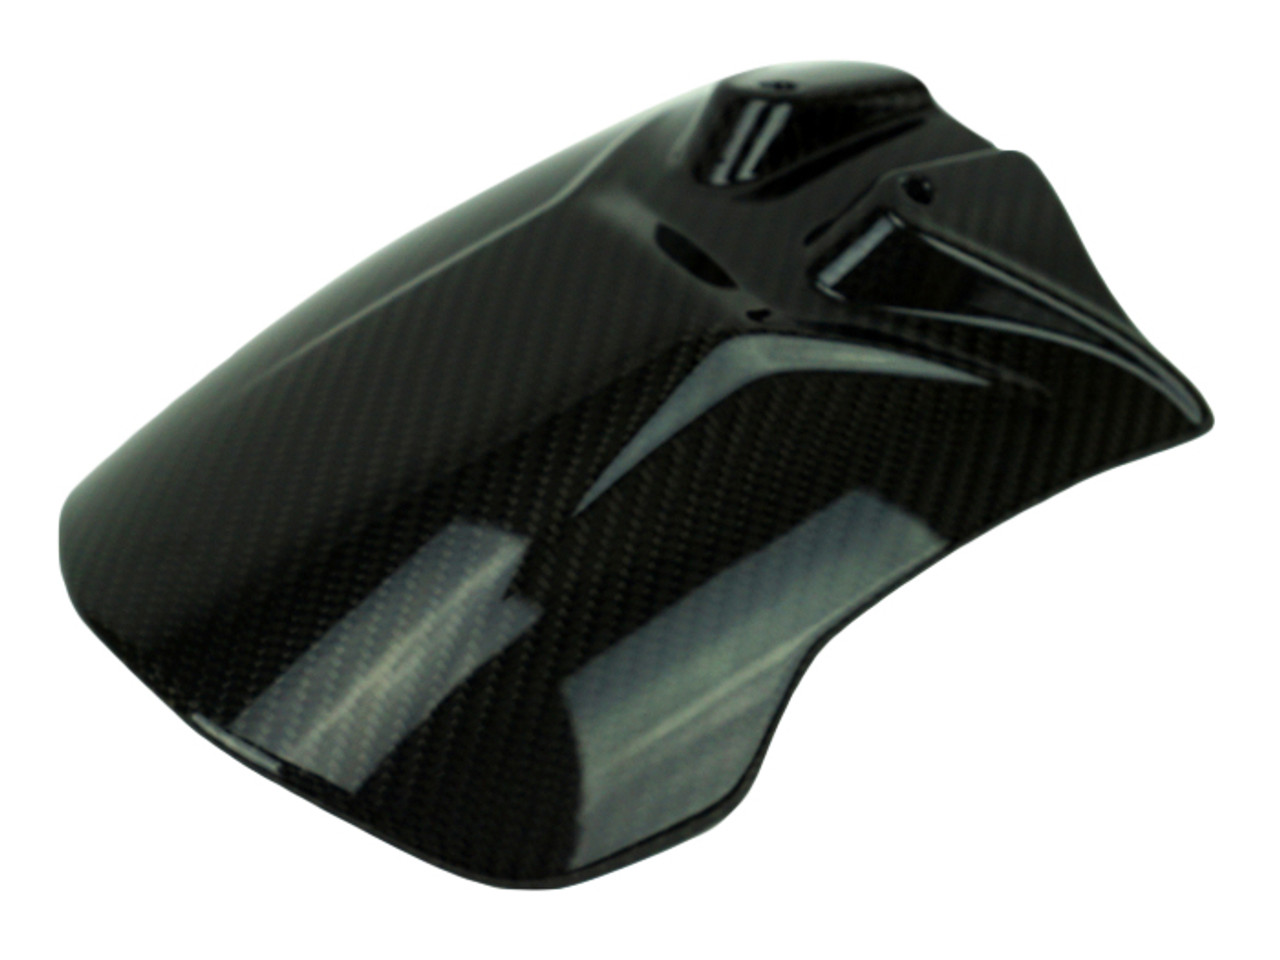 Rear Hugger in Glossy Twill Weave Carbon Fiber for KTM 790/890 Adventure, R, Rally